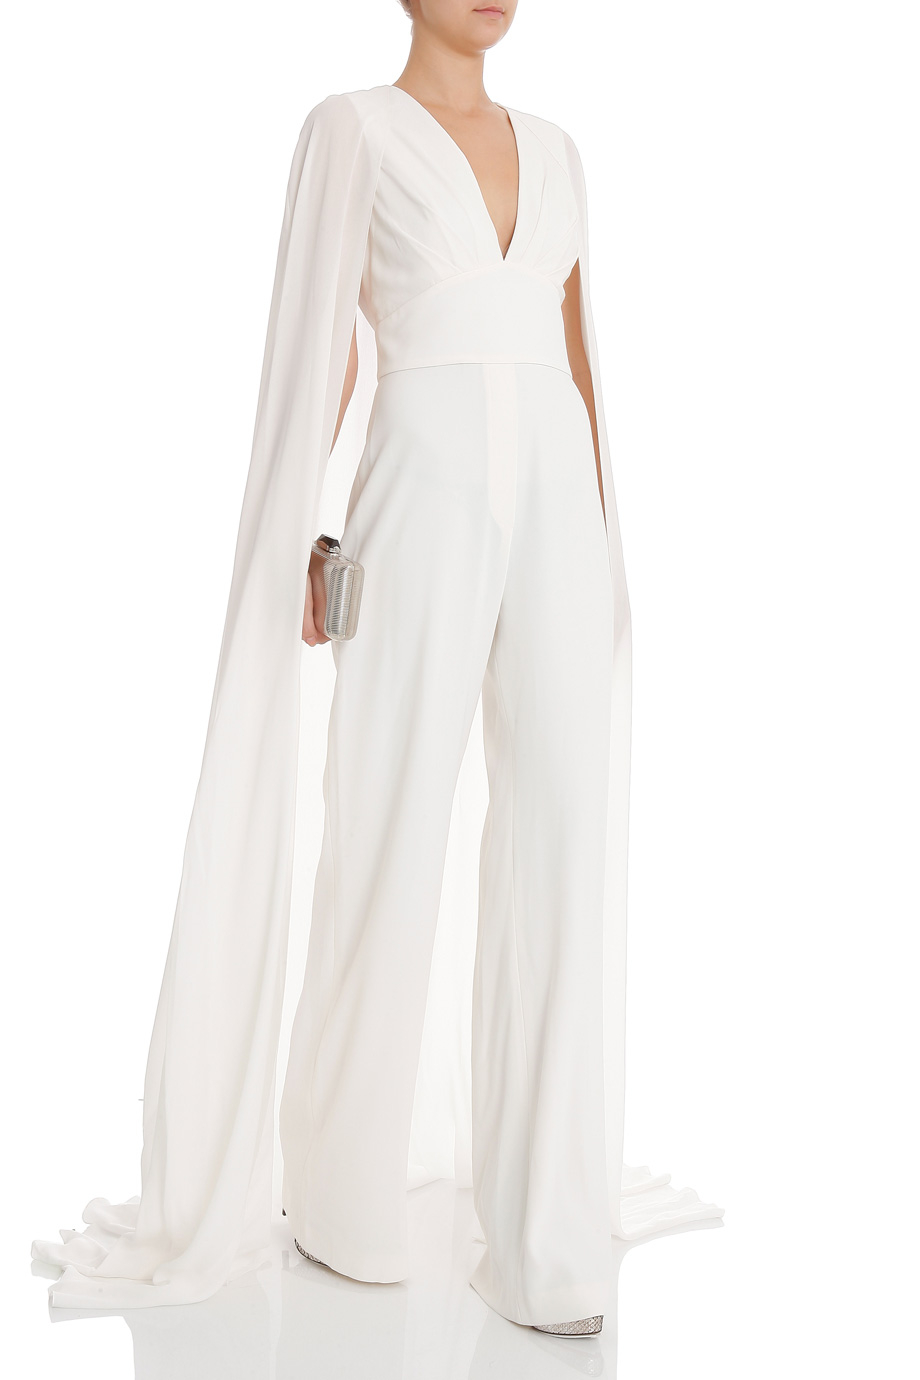 Elie Saab Bklss Jumpsuit With Train in White - Lyst